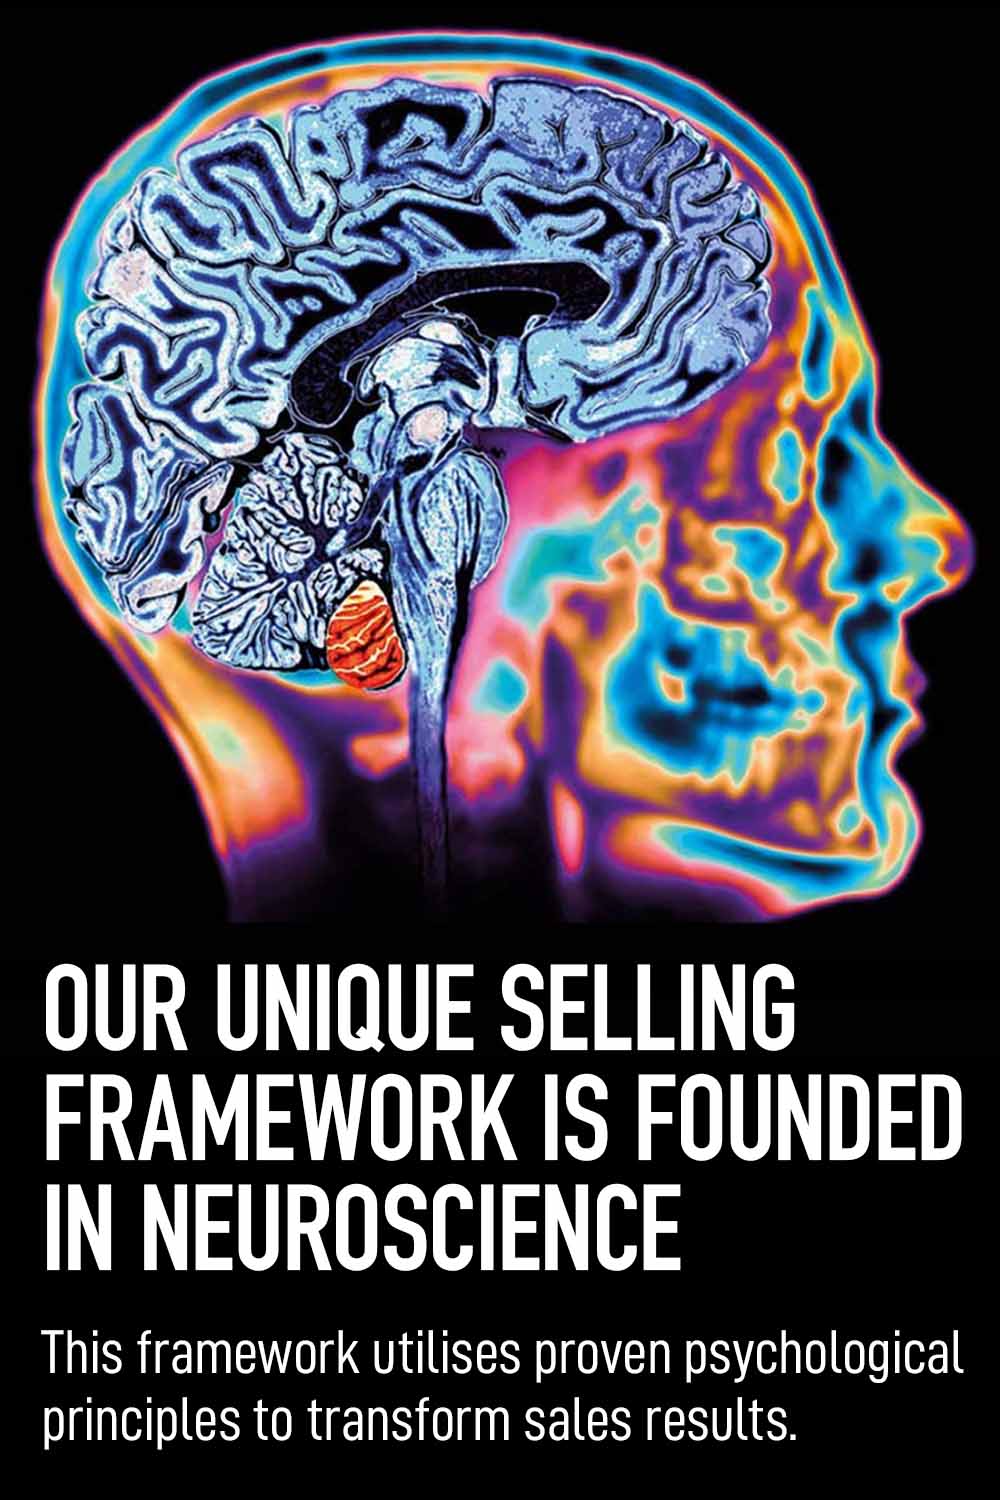 Proven psychological principles to transform sales results.